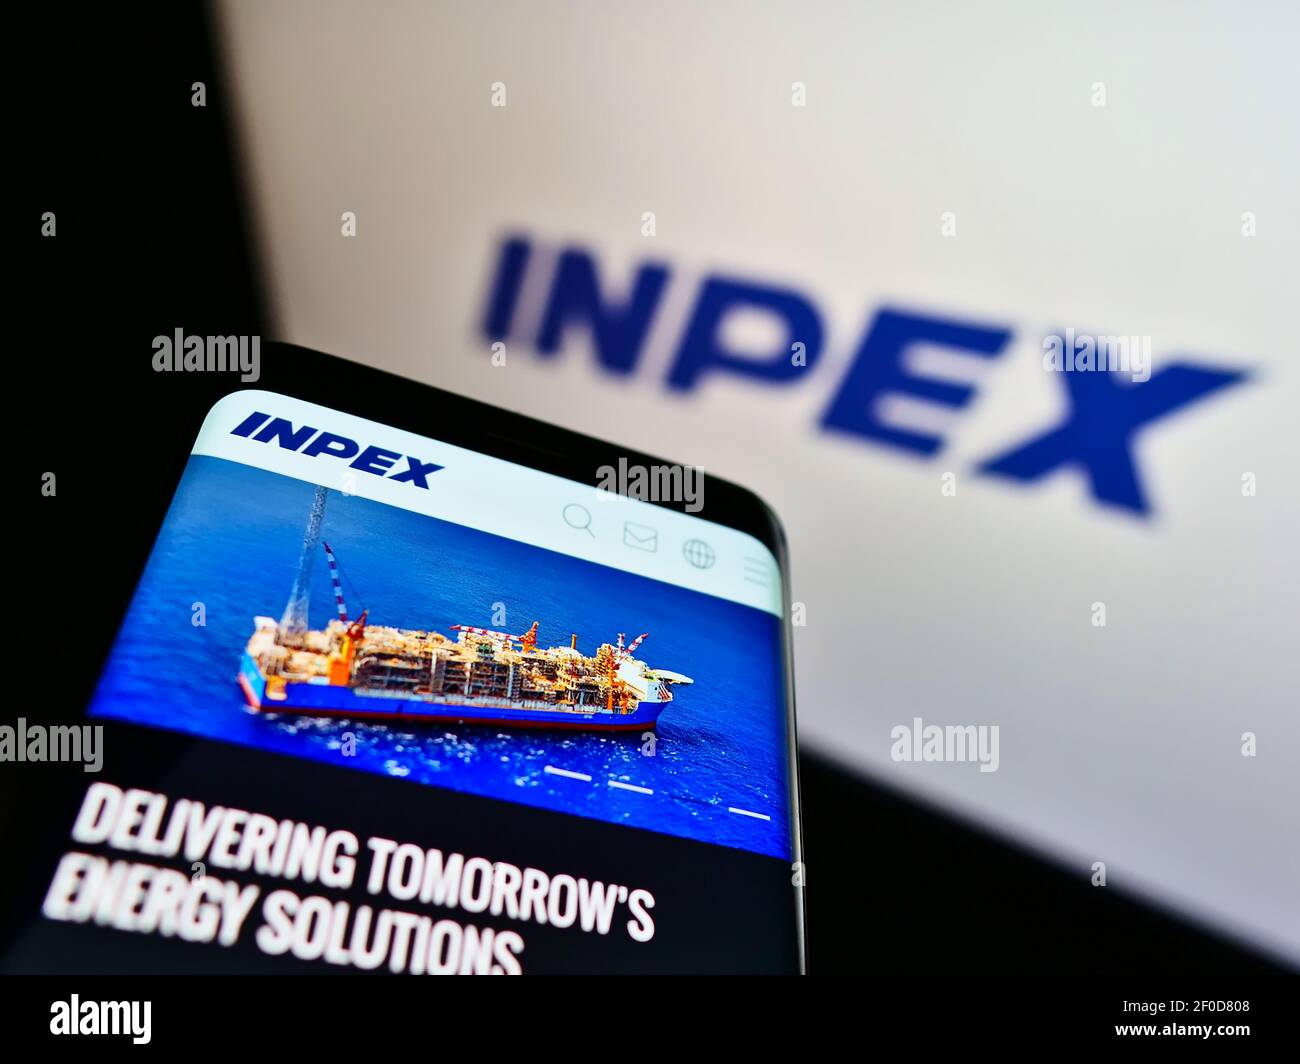 Cellphone with business web page of Japanese oil and gas company Inpex KK on screen in front of logo. Focus on top-left of phone display. Stock Photo